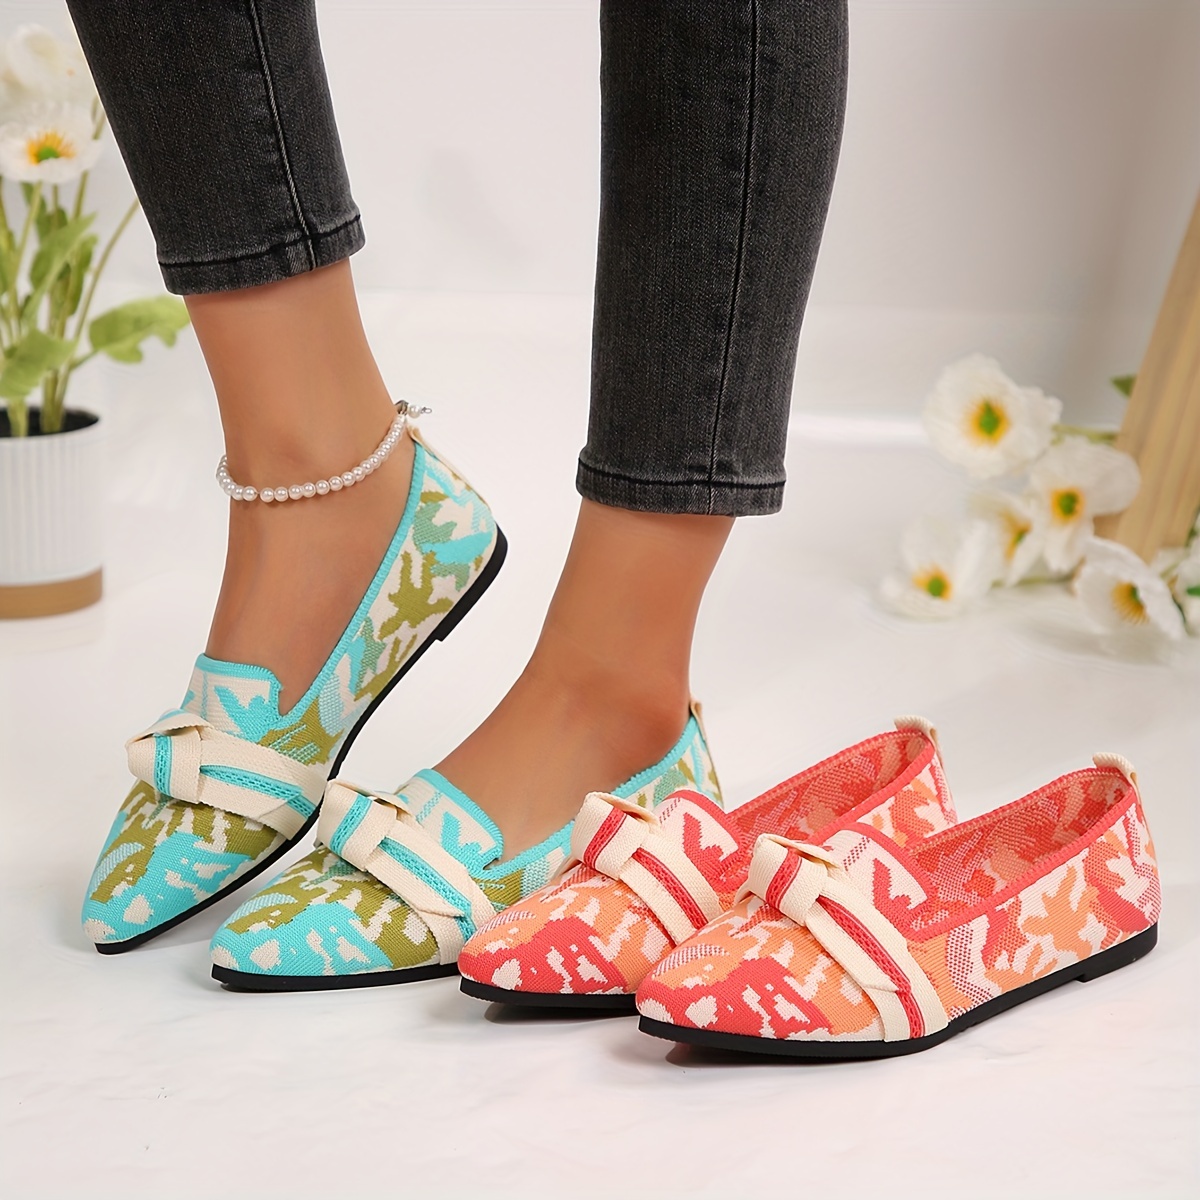 

Women's Fashionable Flat Shoes, Casual Comfort Slip-on Shoes With Bow Detail, Breathable Contrast Sole Flats